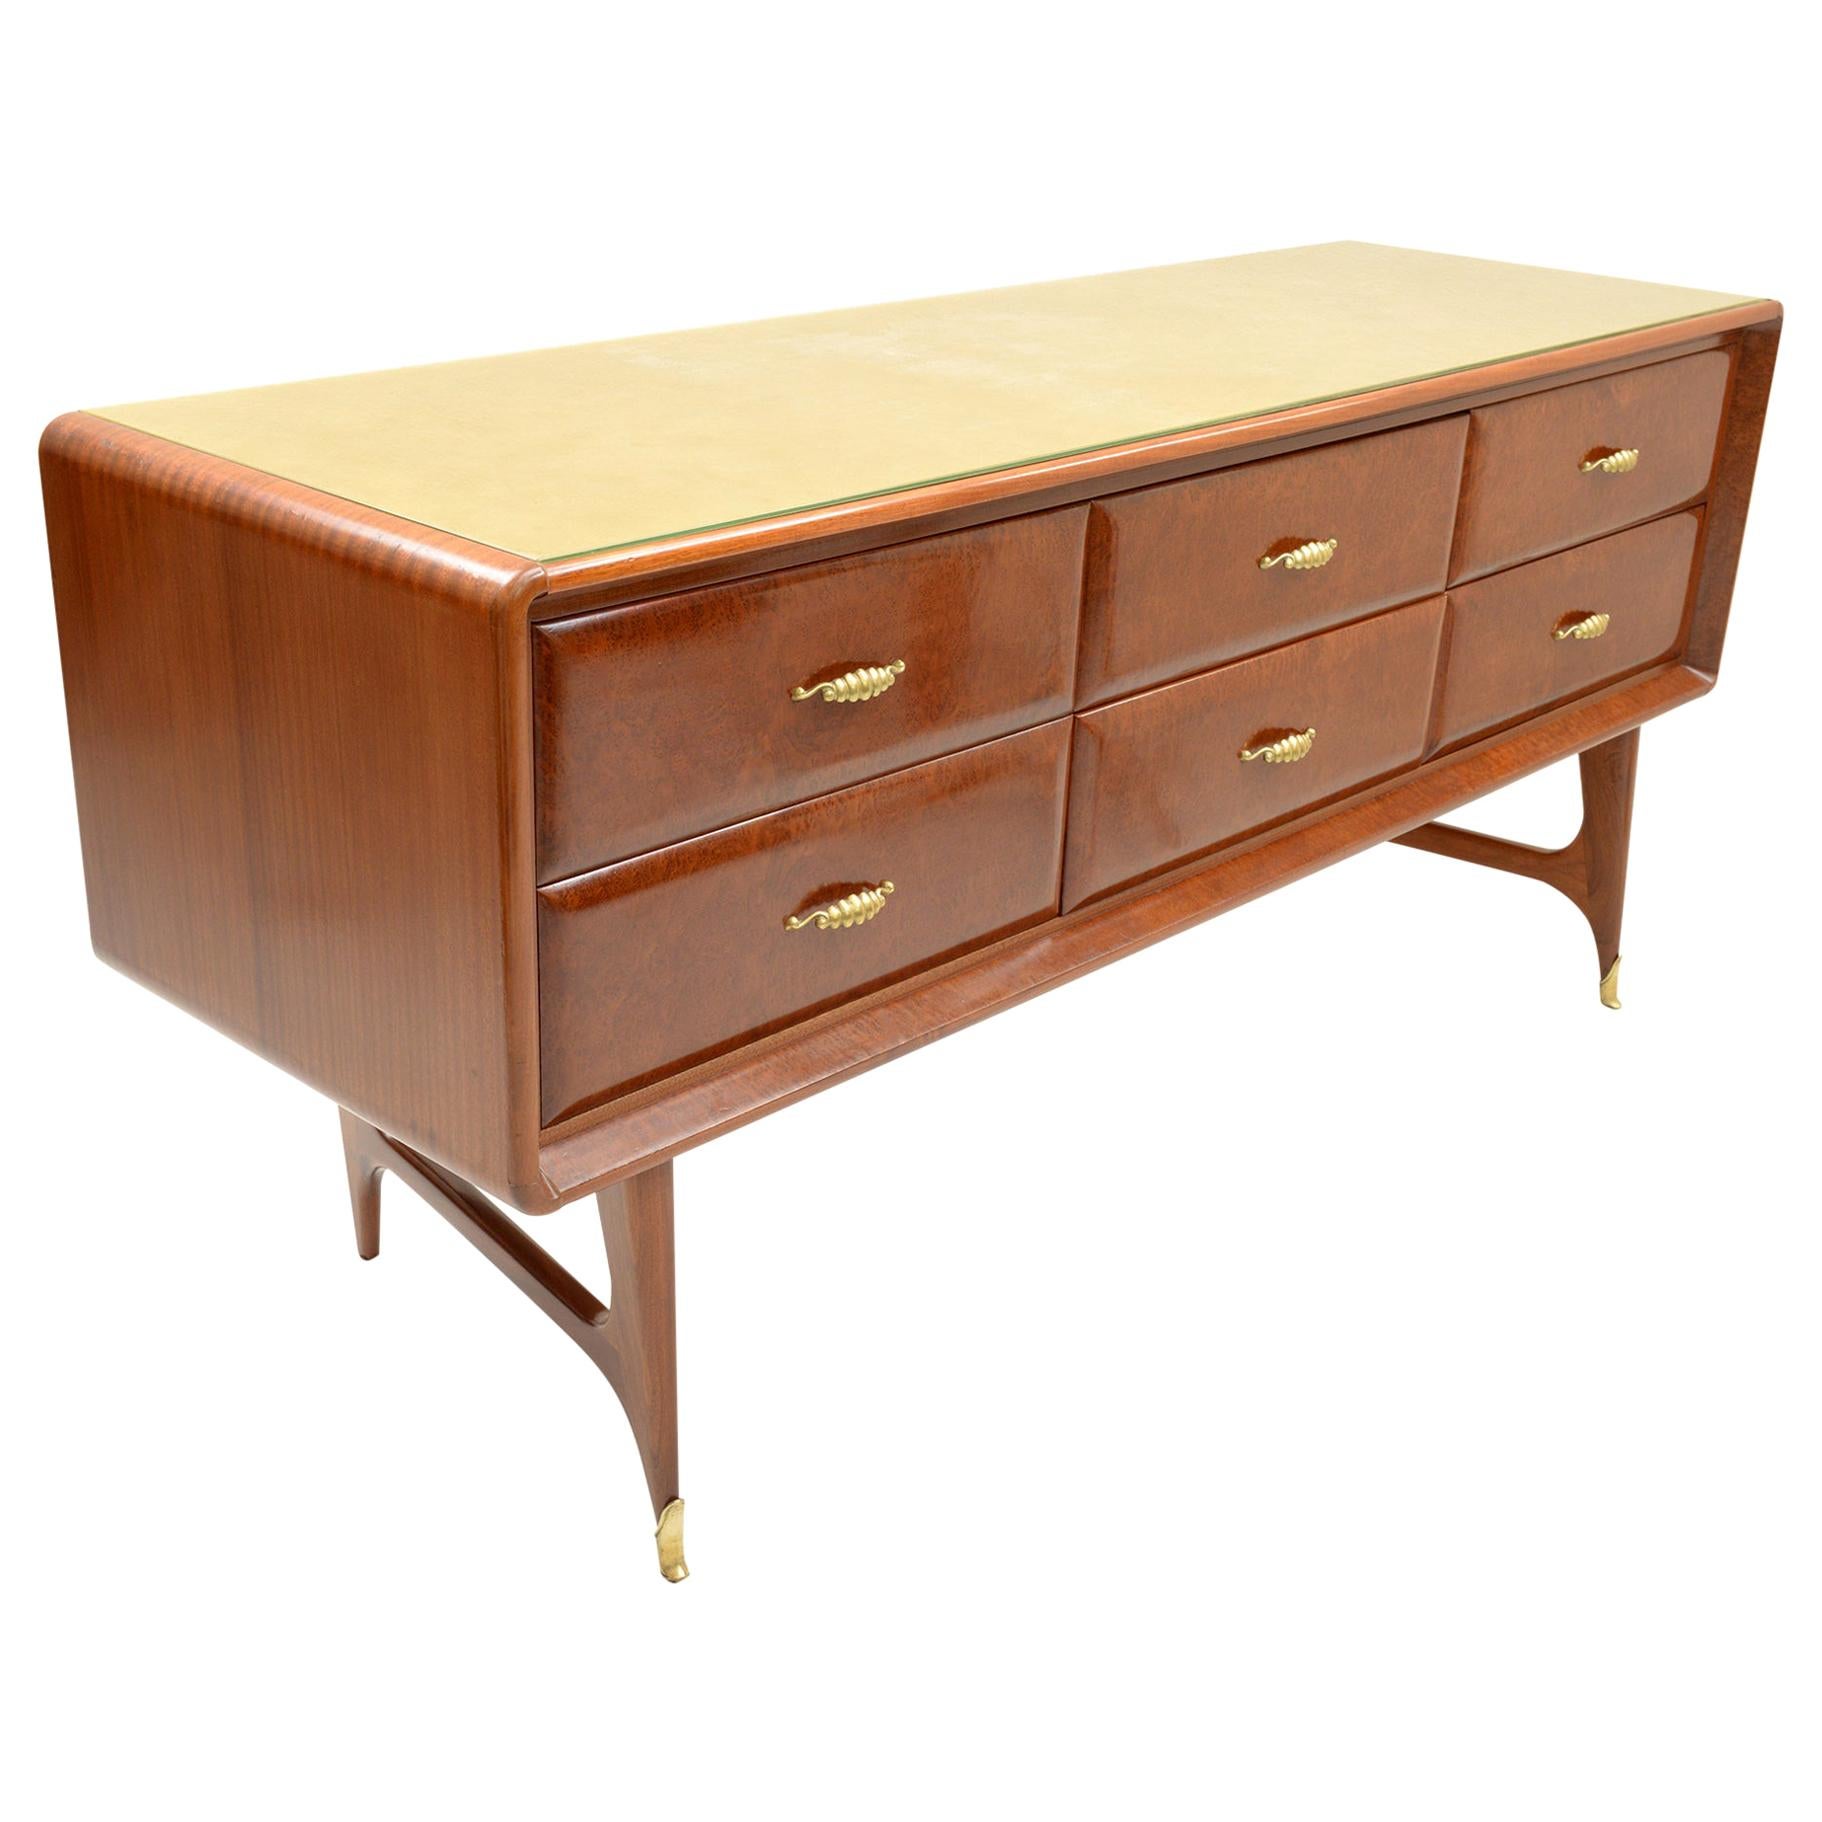 Midcentury Italian Chest with Six Rounded Drawers, Cast Brass Handles and Feet